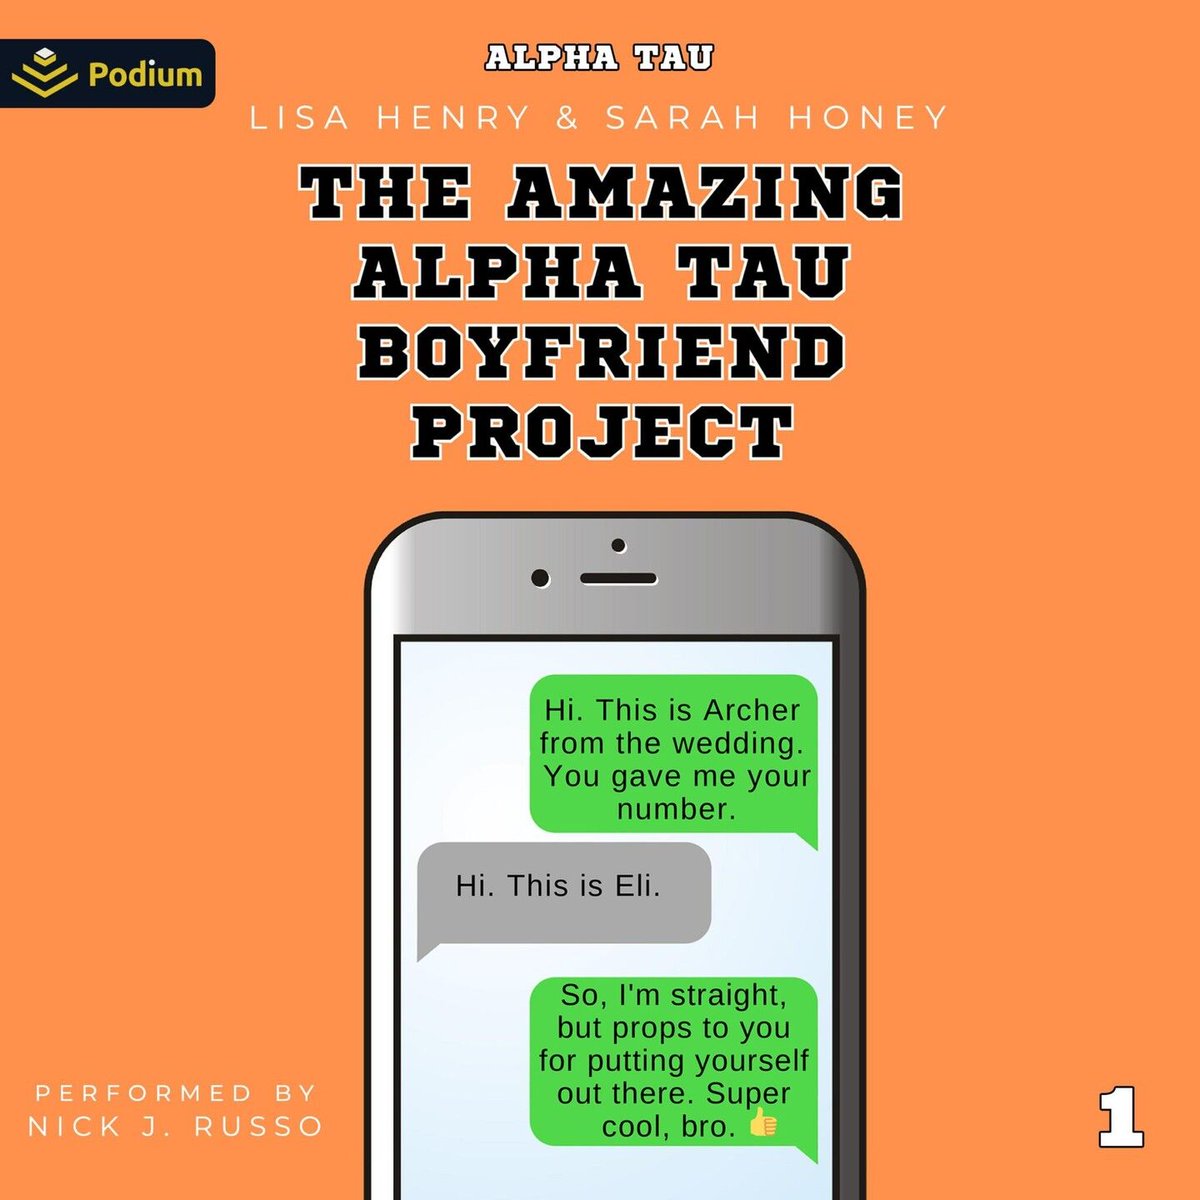 And the audio of The Amazing Alpha Tau Boyfriend Project is now live on Amazon! Nick J. Russo has done a fantastic job with Archer and Eli, so give it a listen!